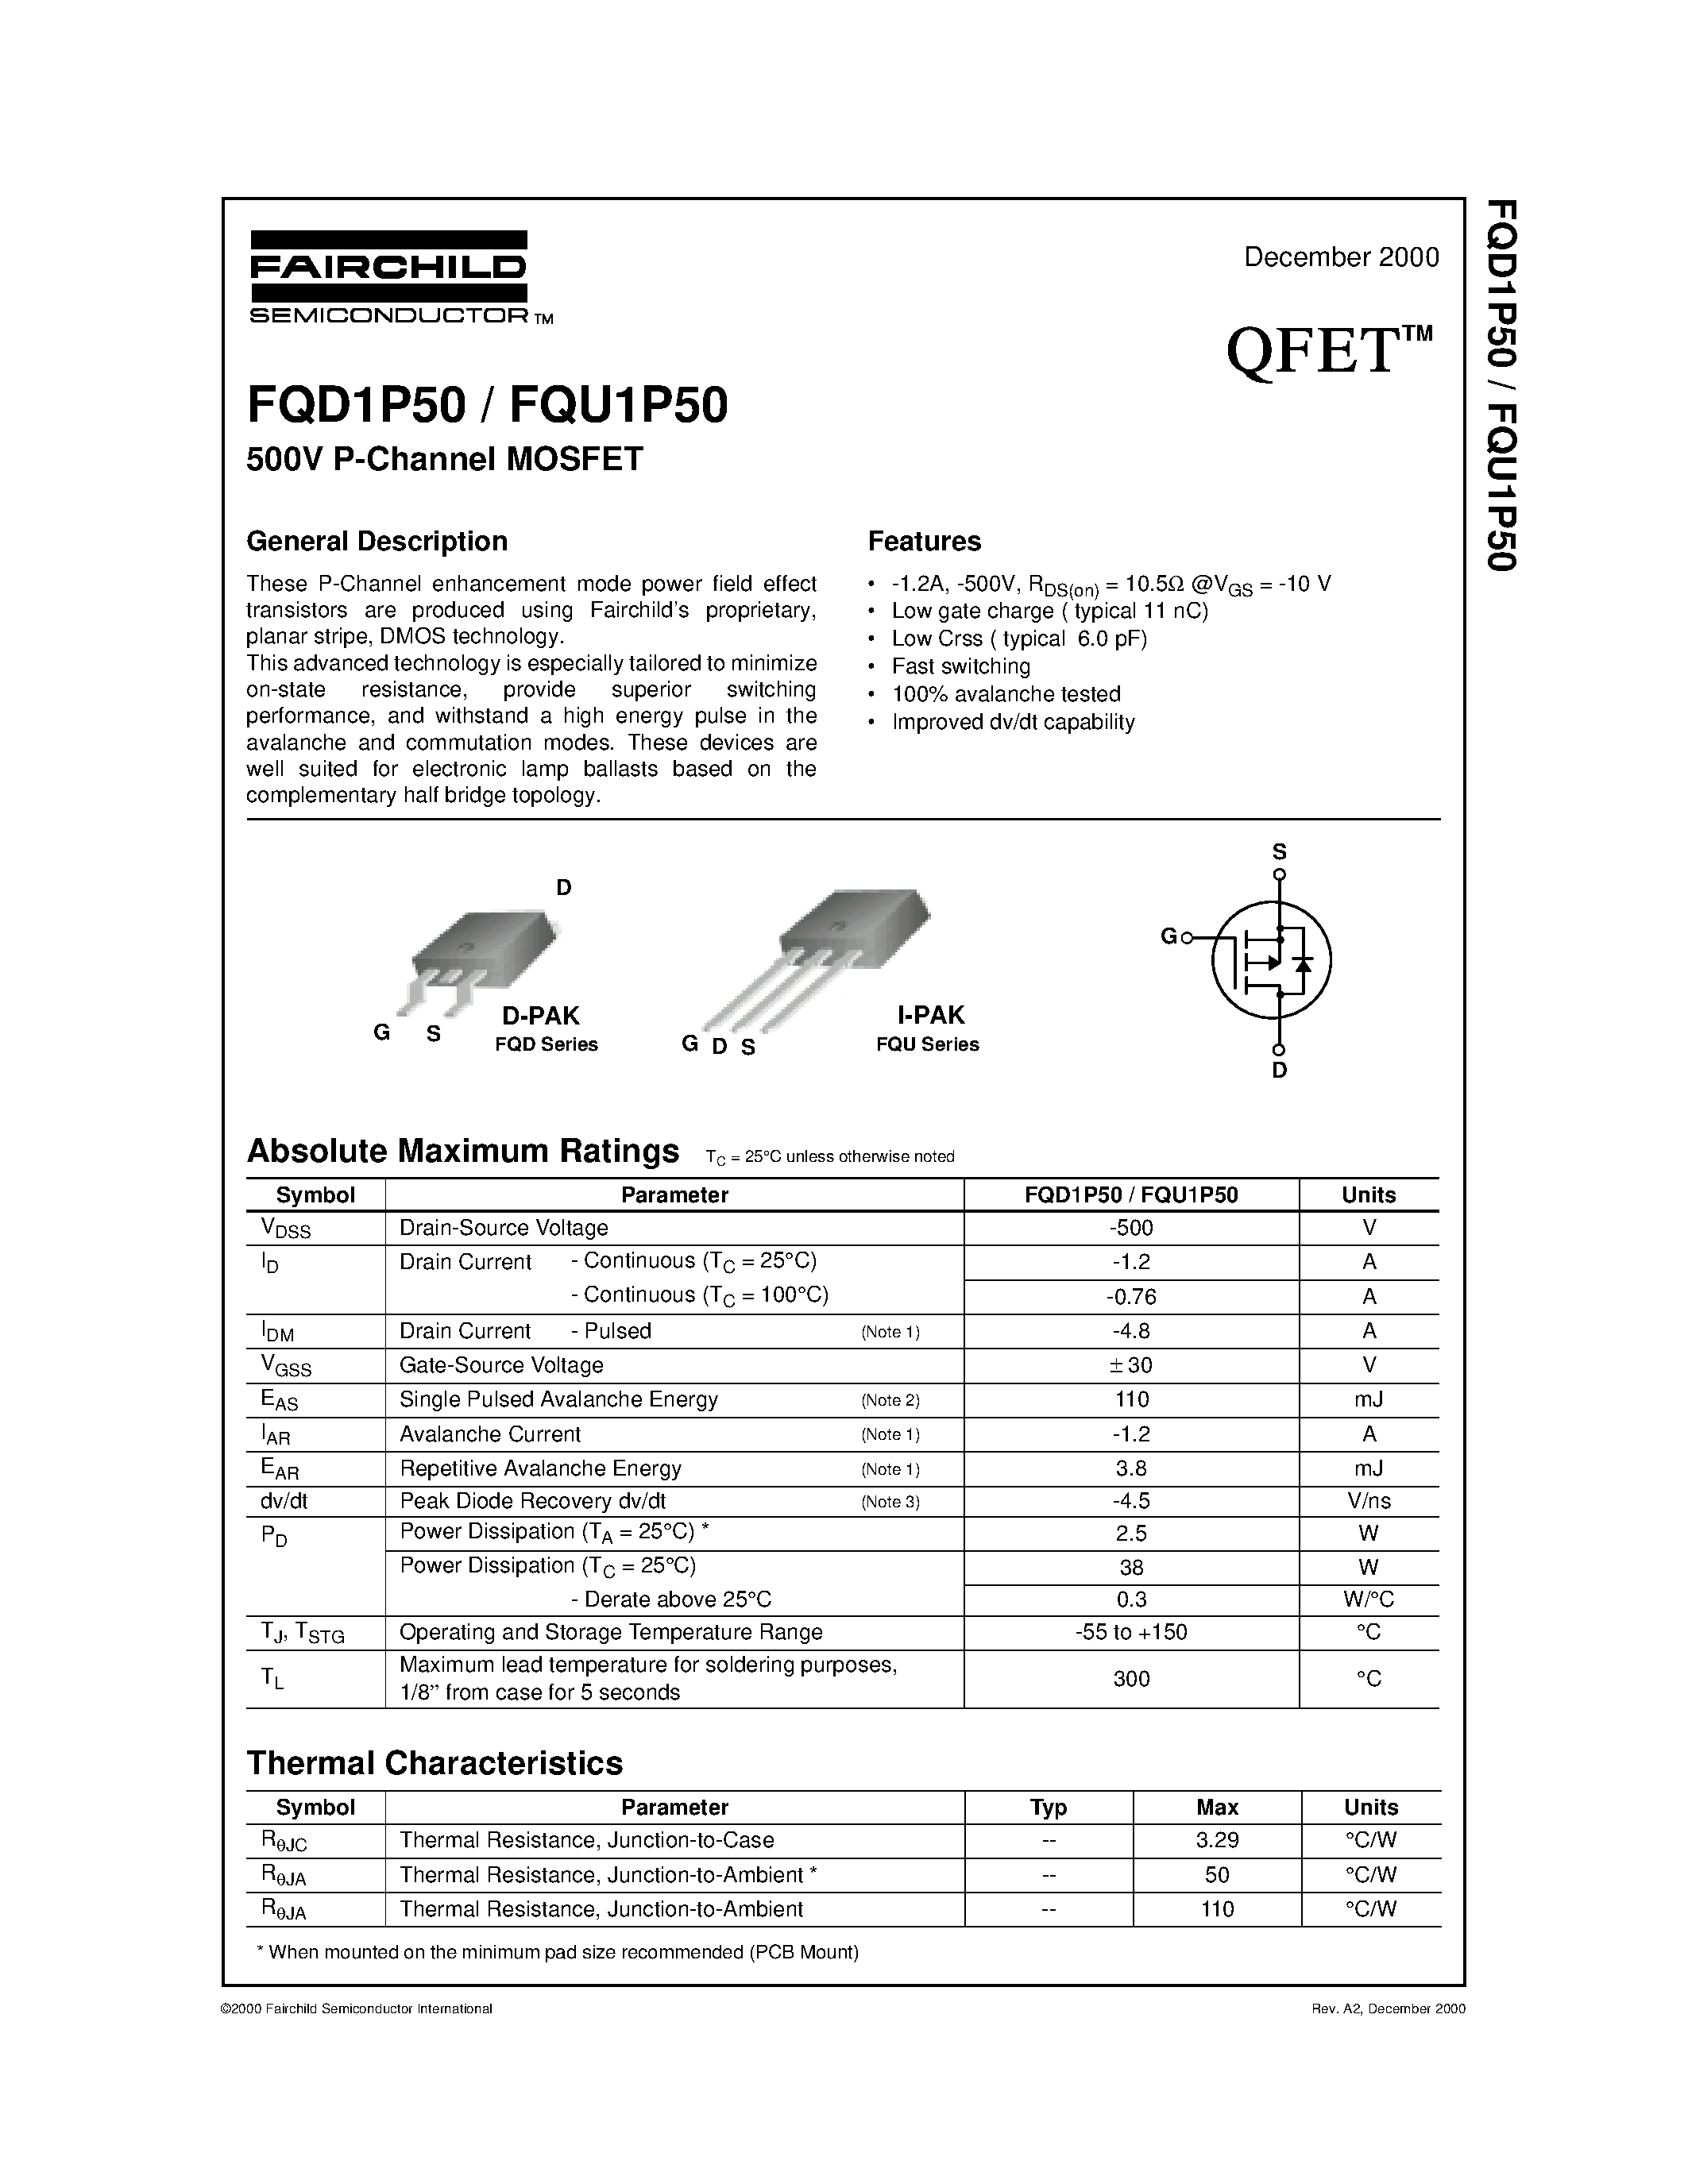 Datasheet FQD1P50 - 500V P-Channel MOSFET page 1